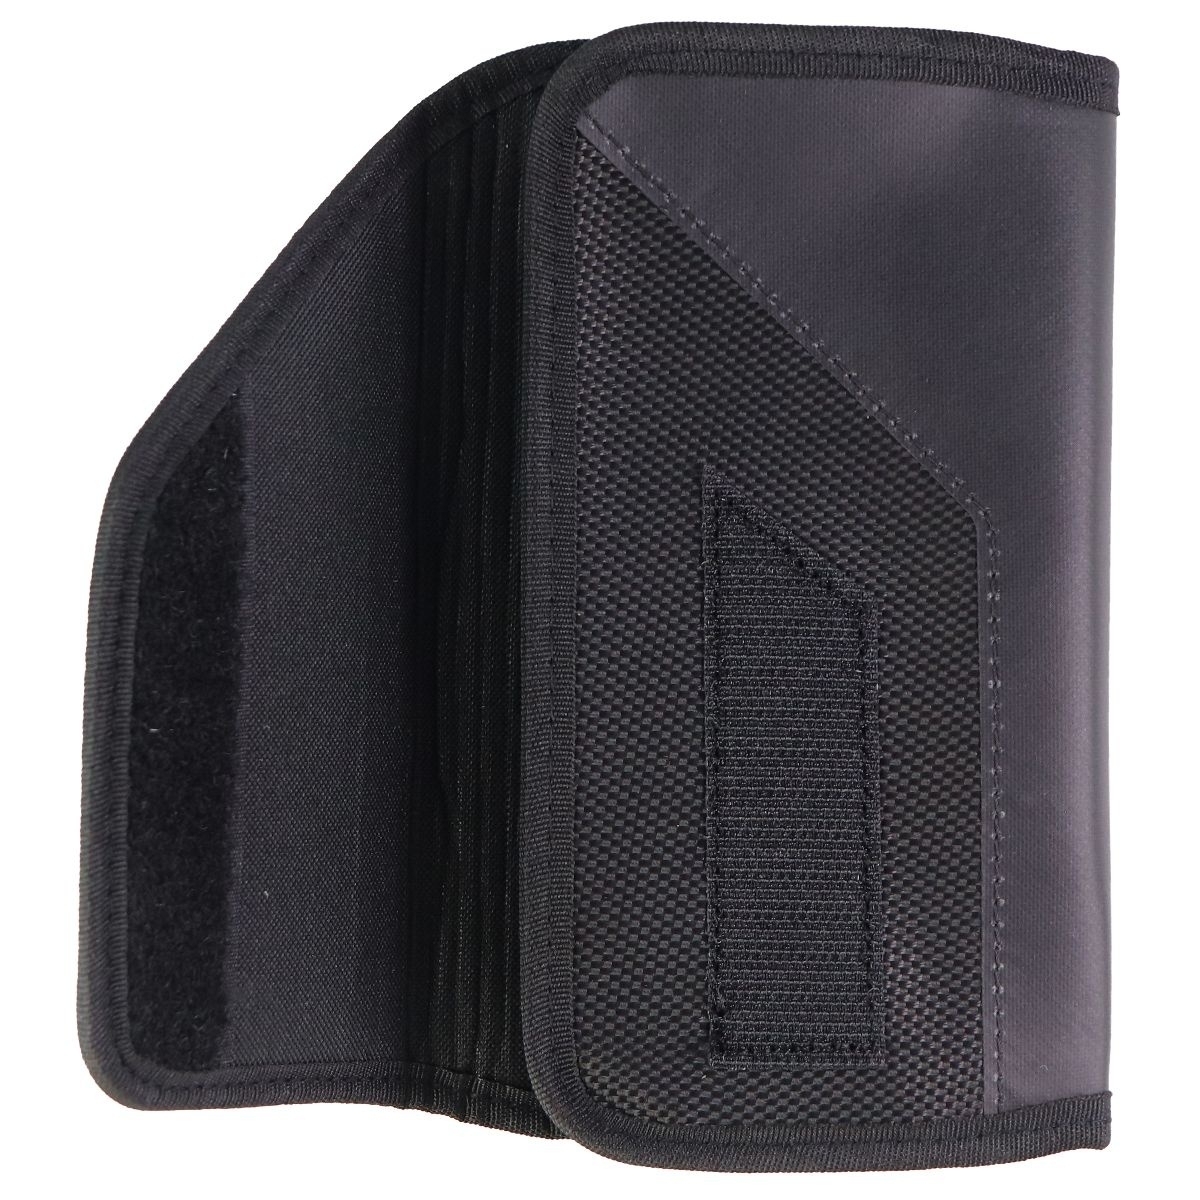 MWorks! Universal Nylon Holster Pouch Case For Up To 6-inch Smartphones - Black